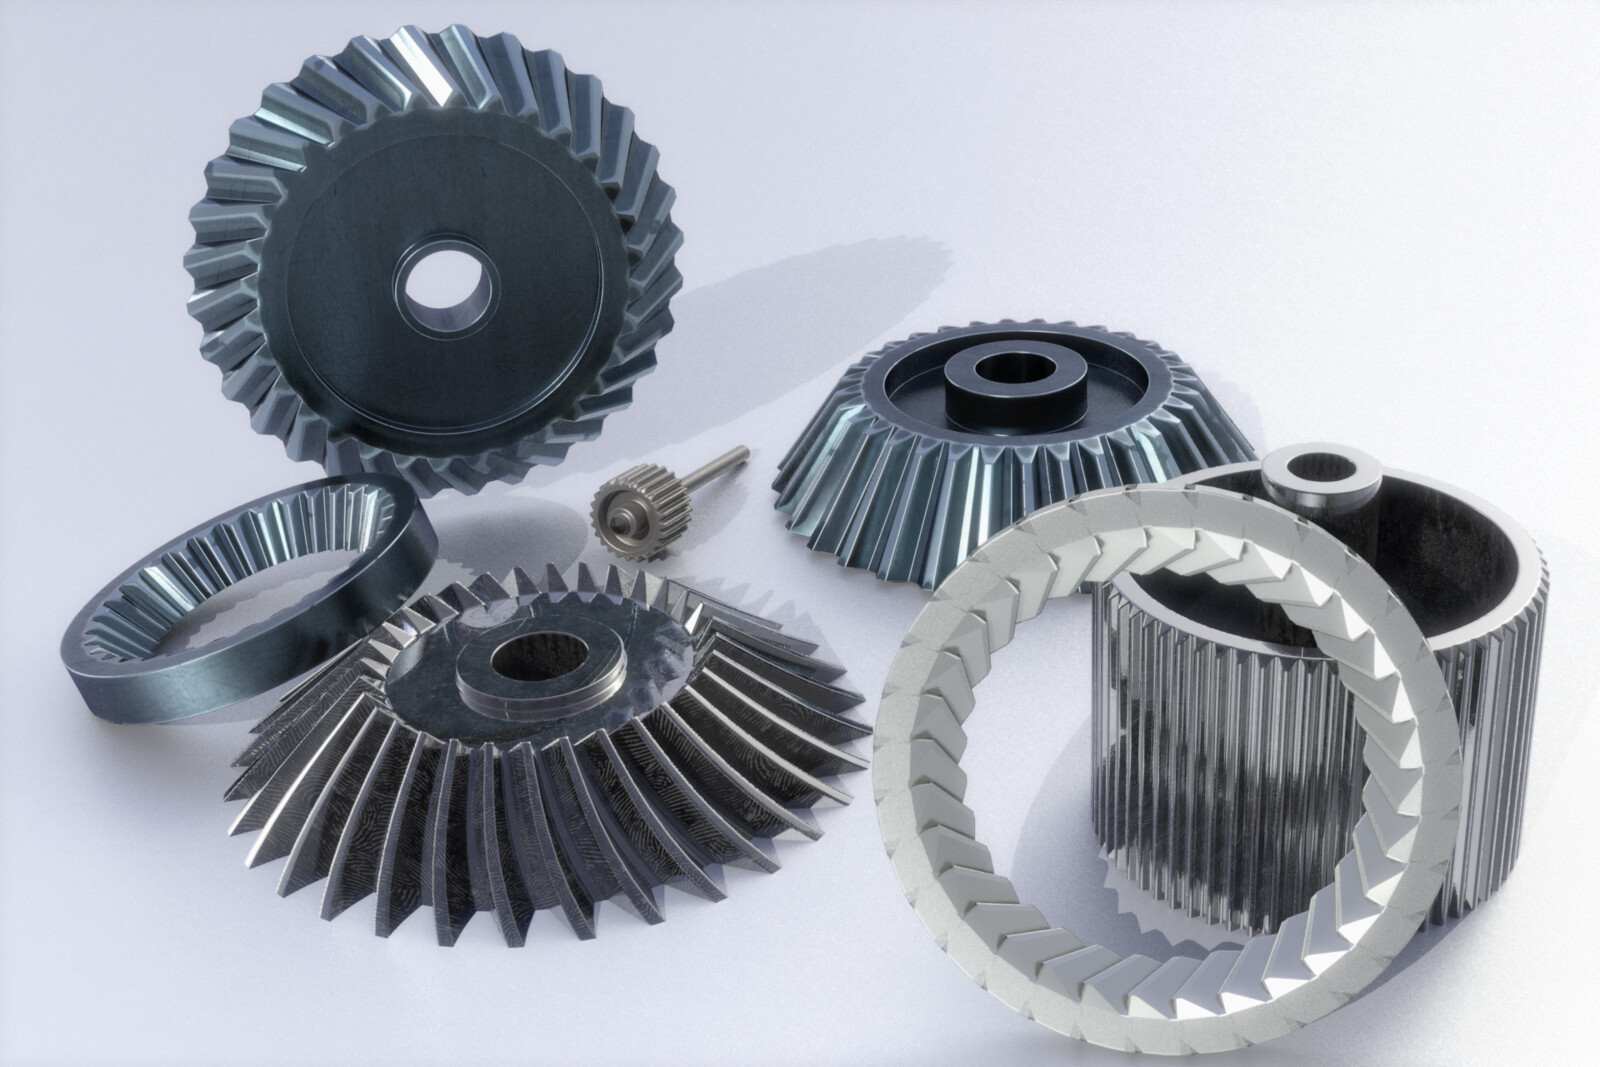 Procedural gears with all procedural texturing from a long time ago!